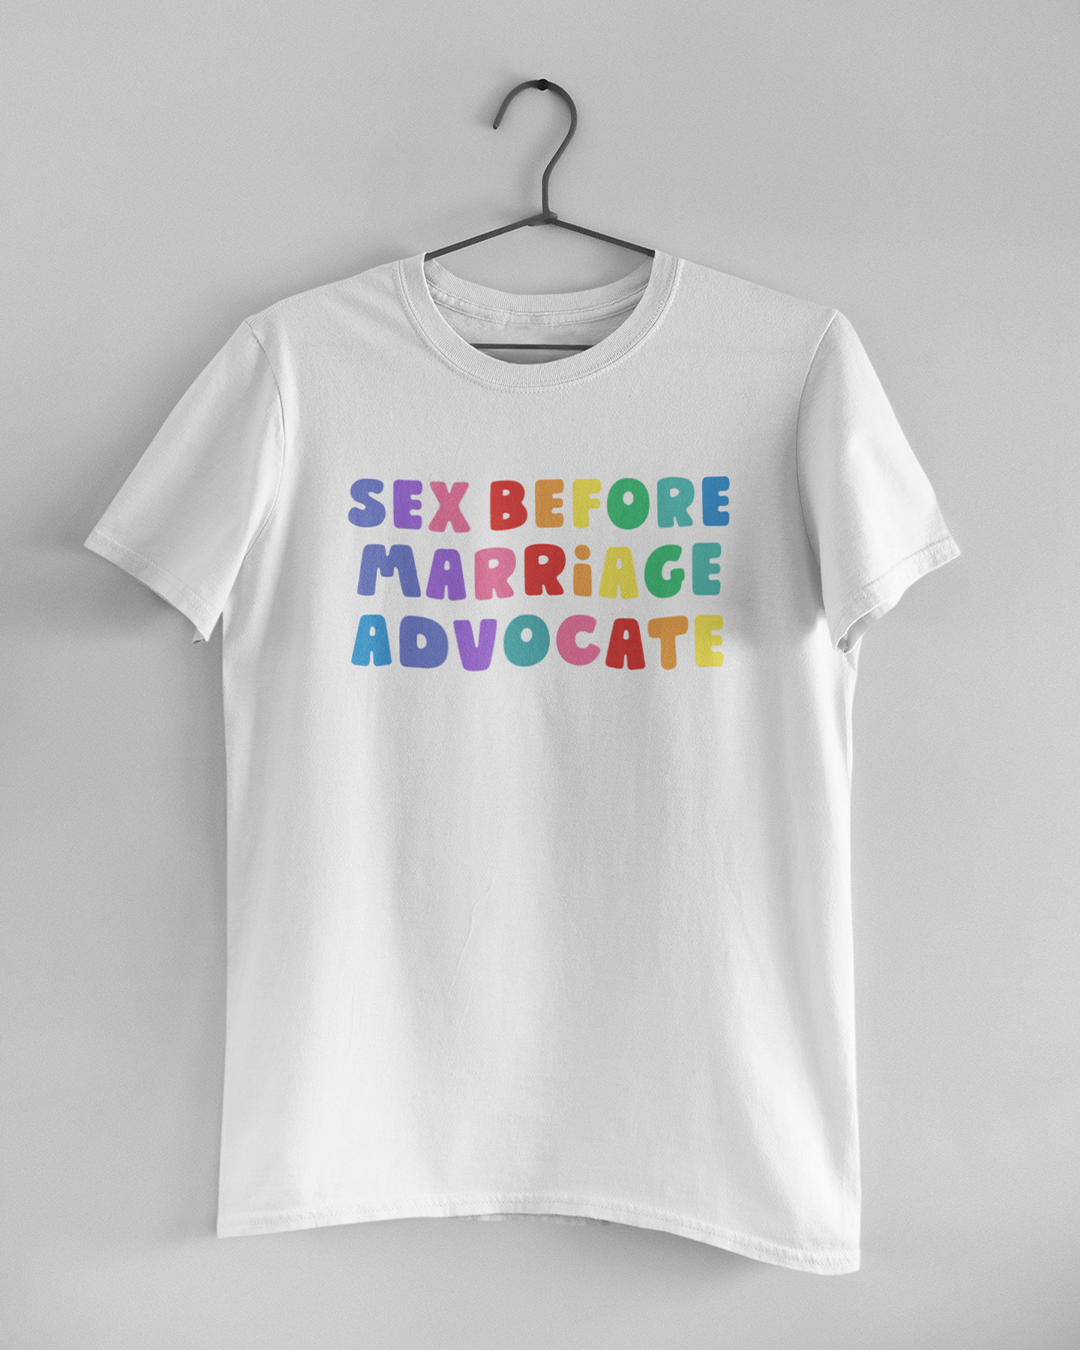 Sex Before Marriage Advocate T-Shirt - Funny LGBT Inspired T-Shirt - LGBT Pride T-Shirt - LGBT Pride T-Shirt